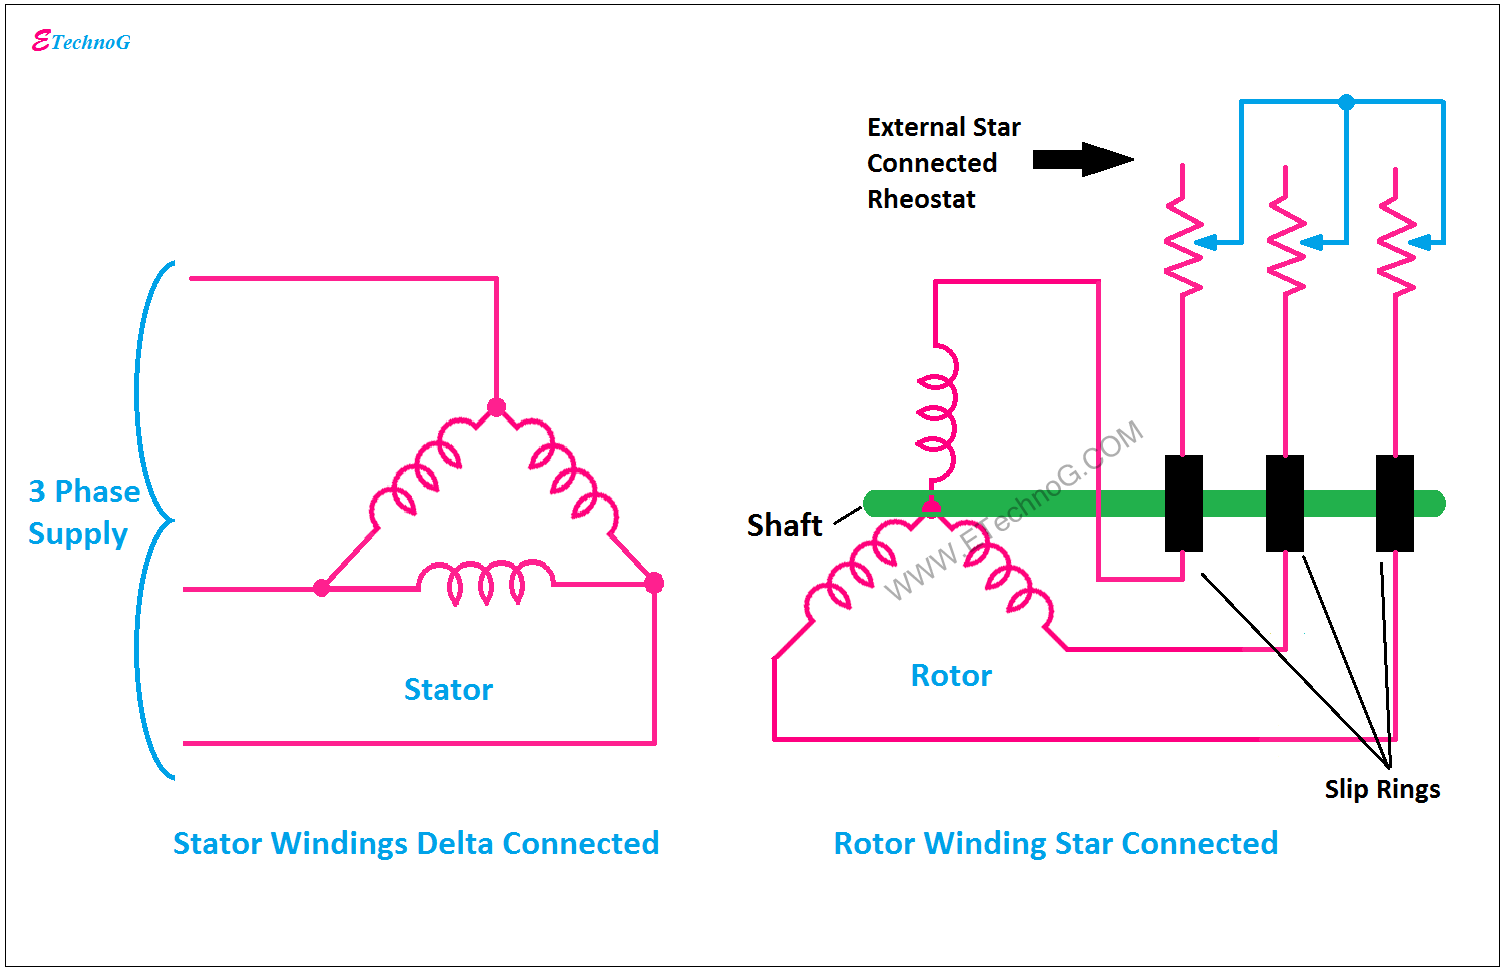 Tether Becks Fruit vegetables Why the Rotor of Slip Ring Induction Motor always Star Connected? - ETechnoG